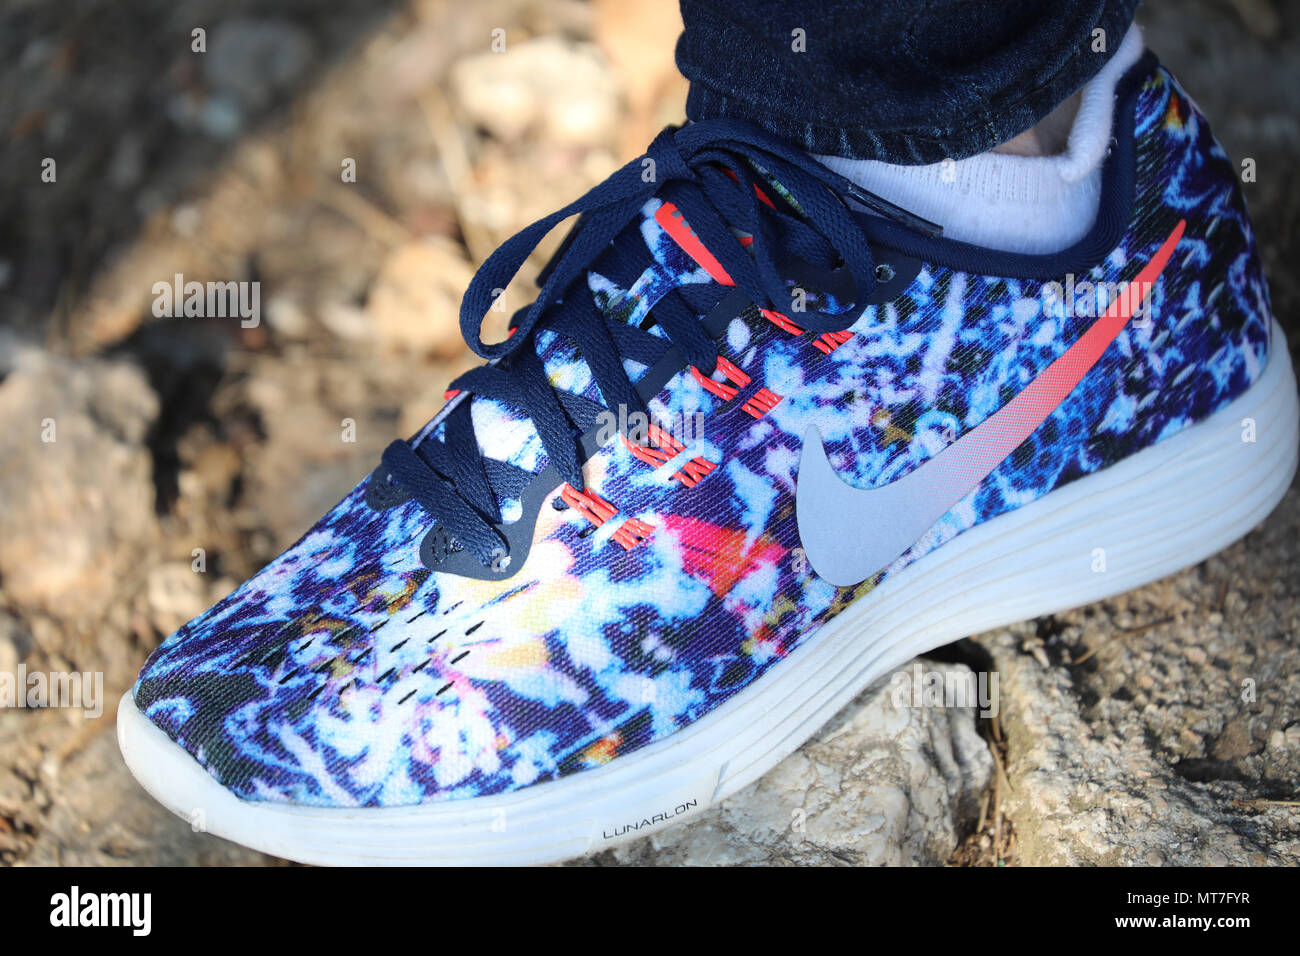 Roquebrune-Cap-Martin, France - March 23, 2018: Close Up Shot of a Woman's Nike  Lunarlon Running Shoe (Multicolor) in Nature Stock Photo - Alamy